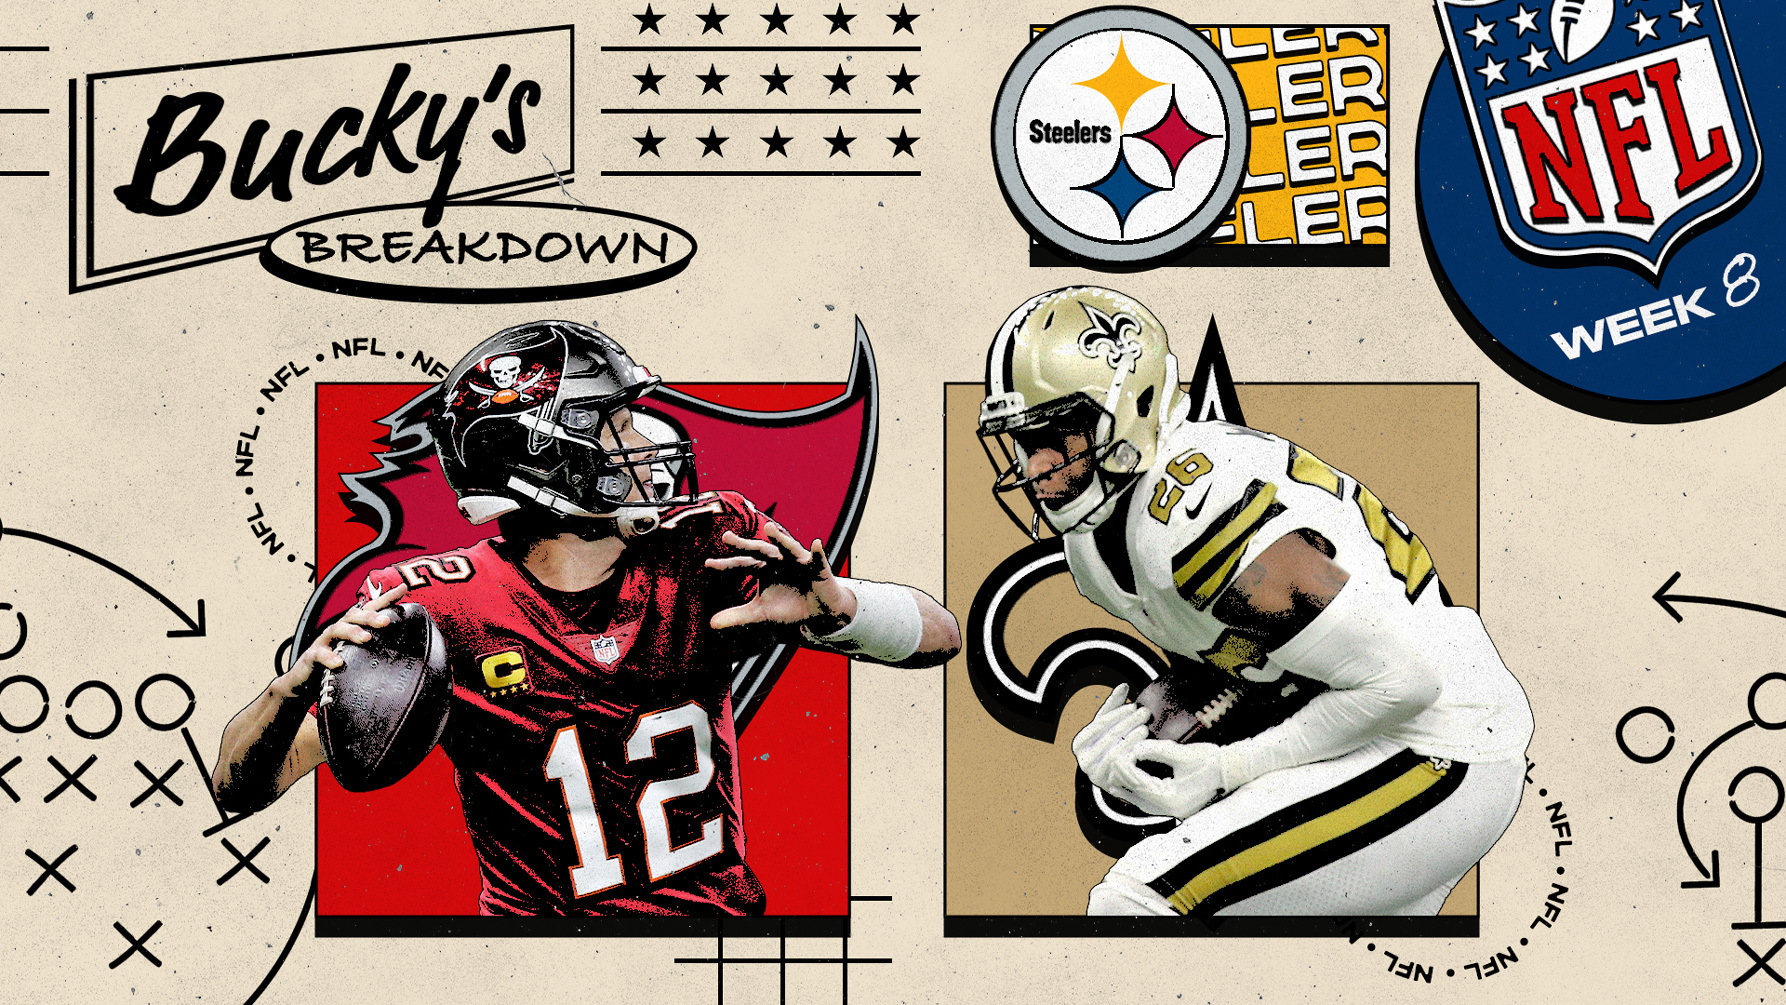 Bucky's Breakdown: Saints, Patriots, Steelers post gritty wins while Mike White upends Bengals